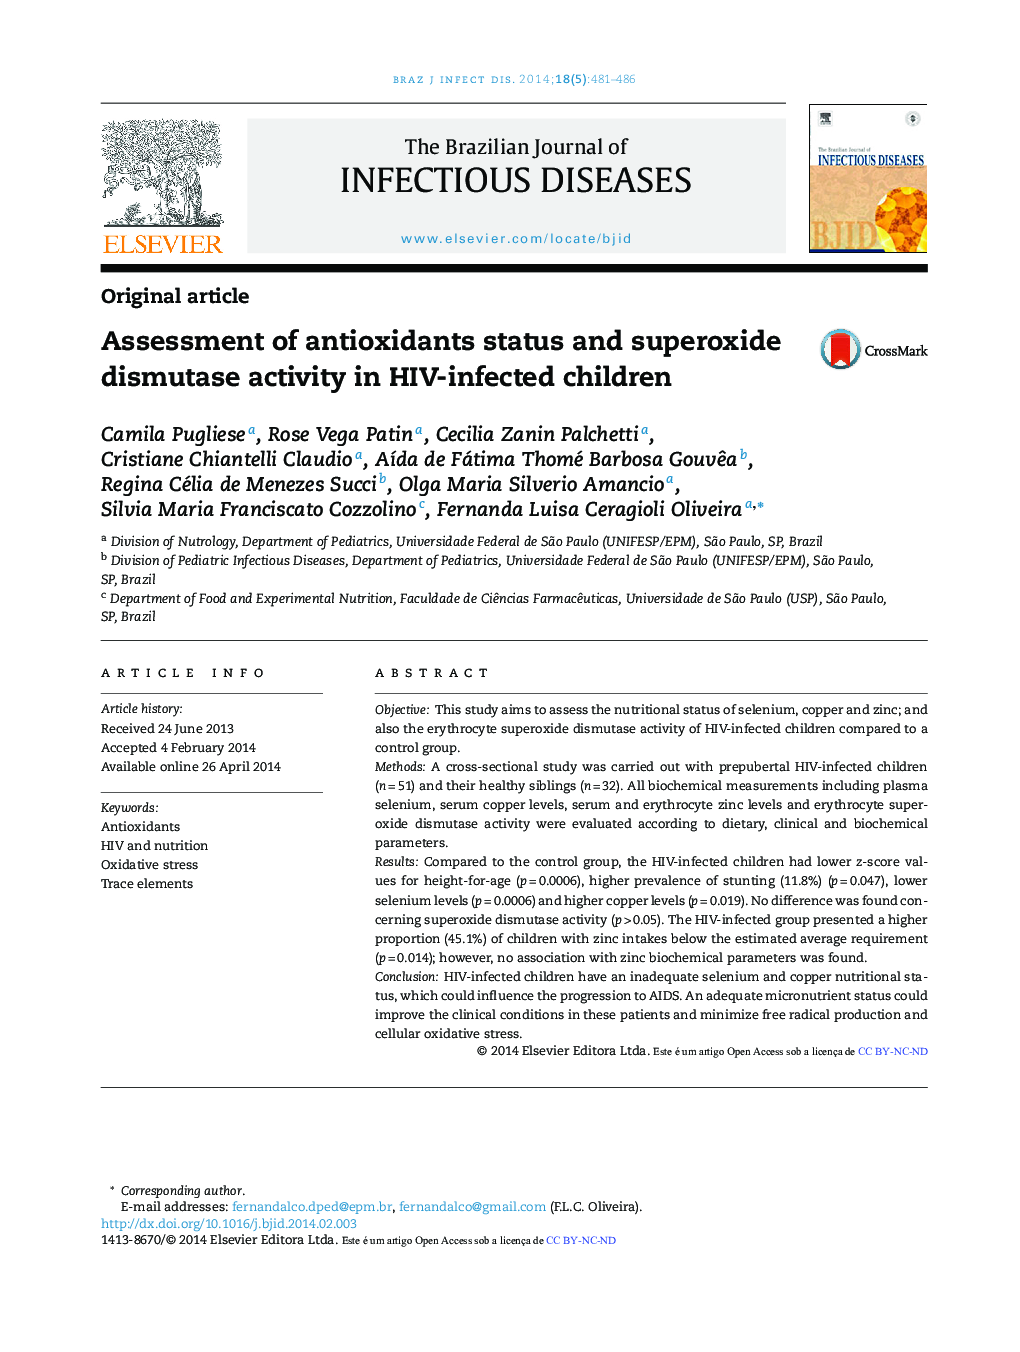 Assessment of antioxidants status and superoxide dismutase activity in HIV-infected children